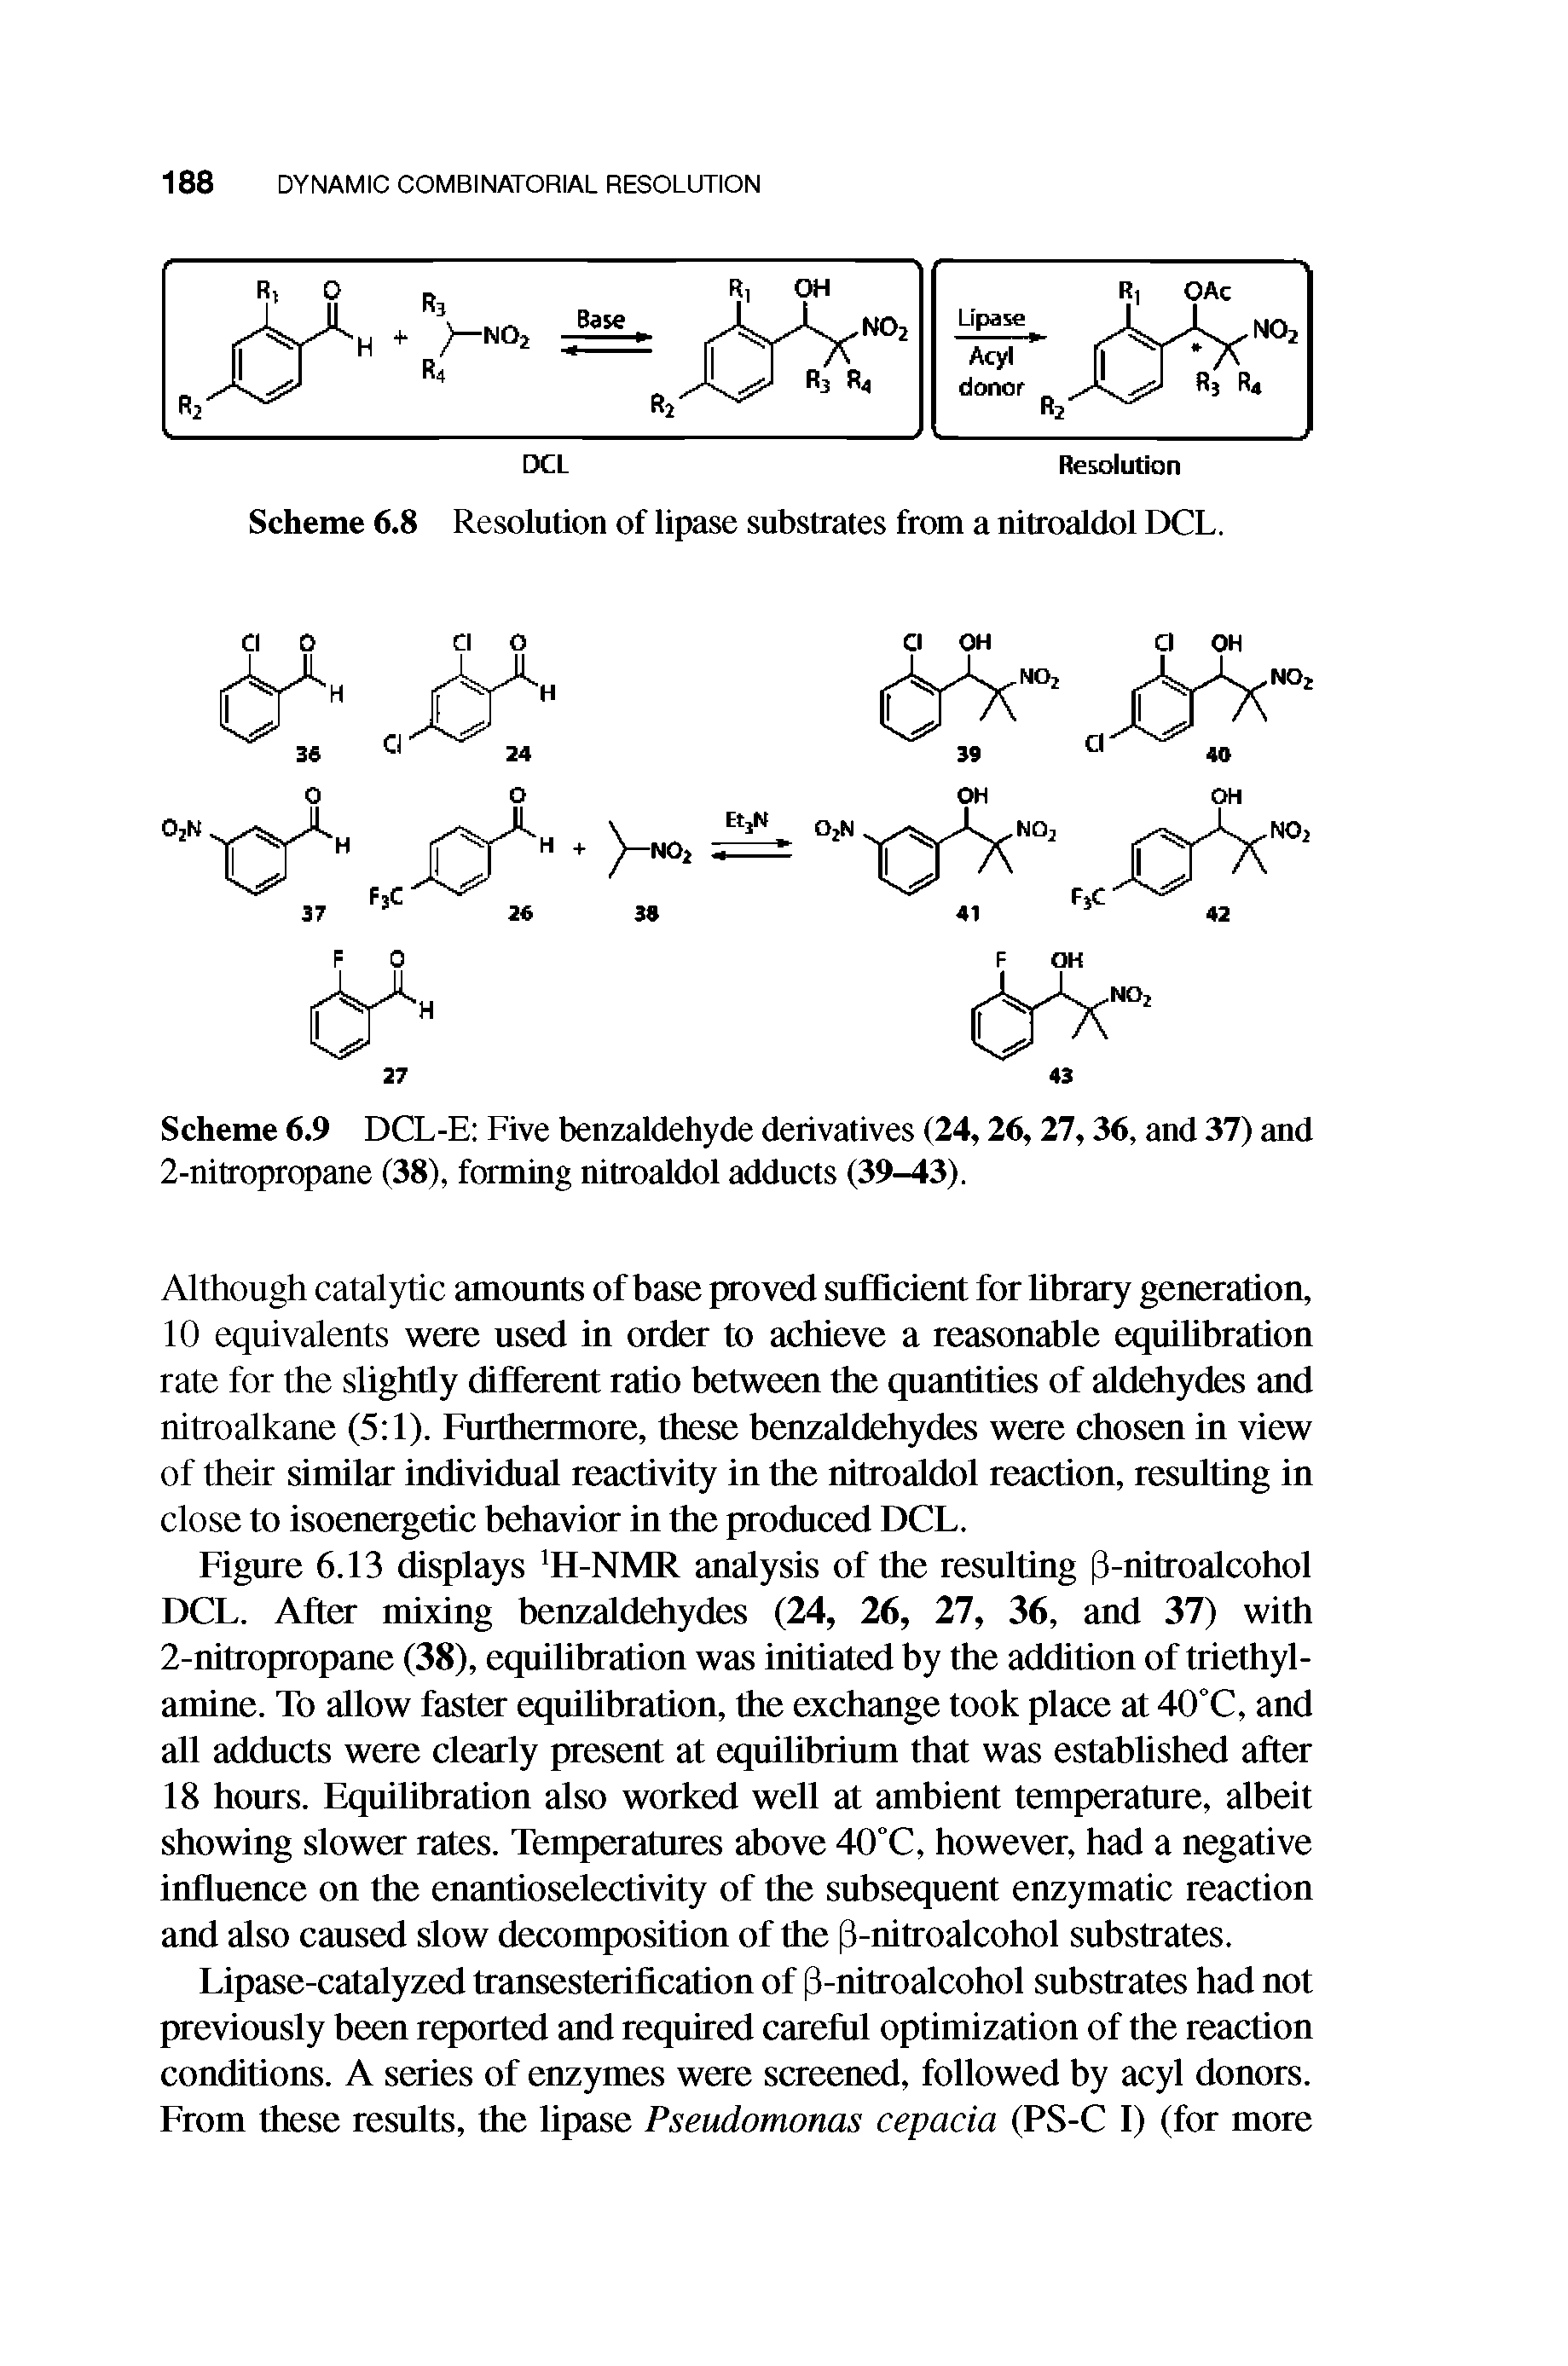 Scheme 6.9 DCL-E Five benzaldehyde derivatives (24,26,27,36, and 37) and 2-nitropropane (38), forming nitroaldol adducts (39-43).